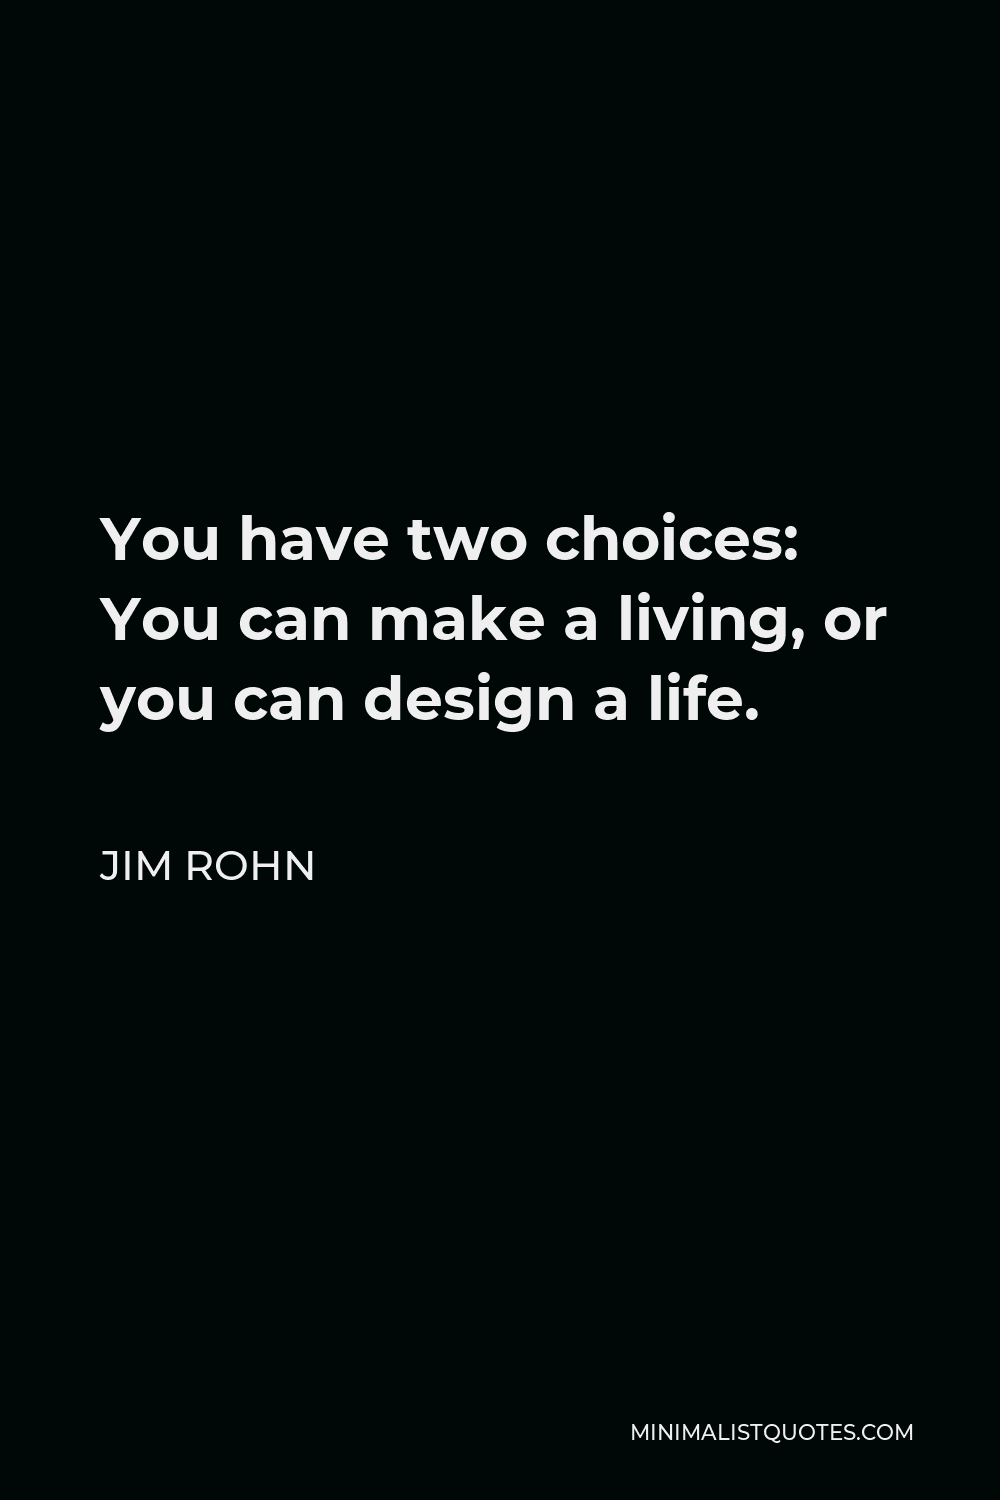 Jim Rohn Quote - You have two choices: You can make a living, or you can design a life.